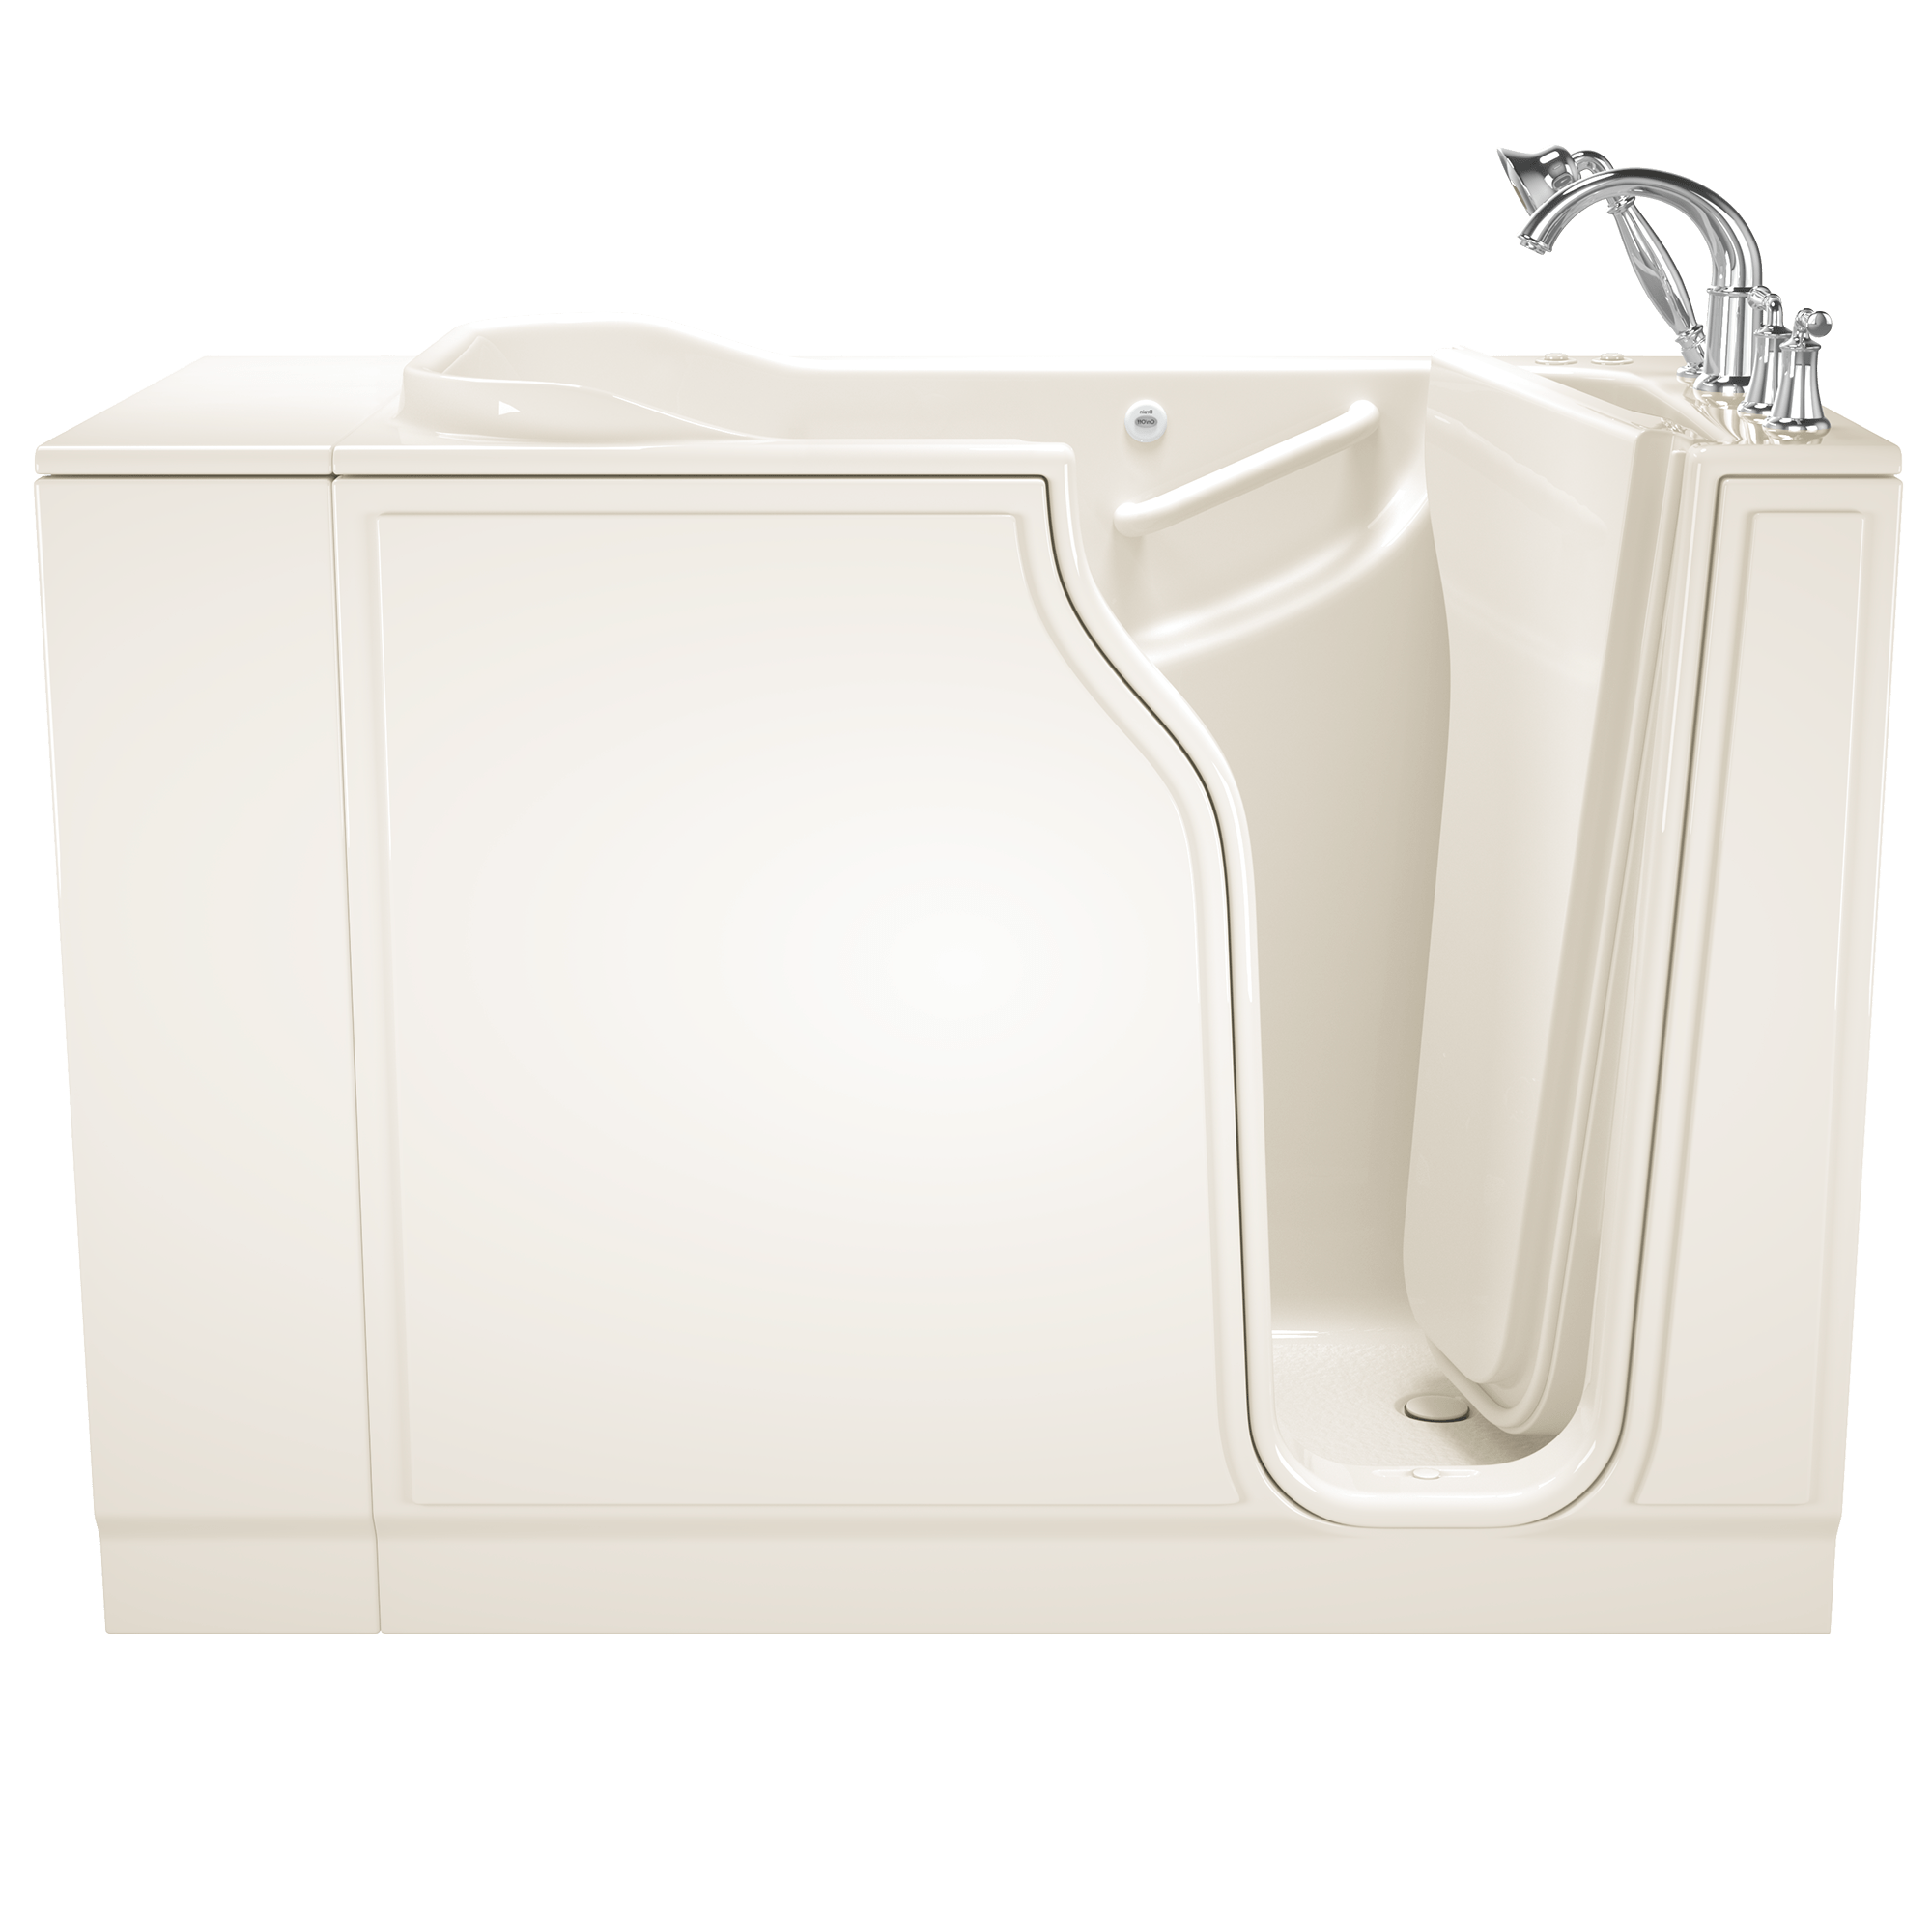 Gelcoat Value Series 30 x 52  Inch Walk in Tub With Combination Air Spa and Whirlpool Systems   Right Hand Drain With Faucet WIB LINEN